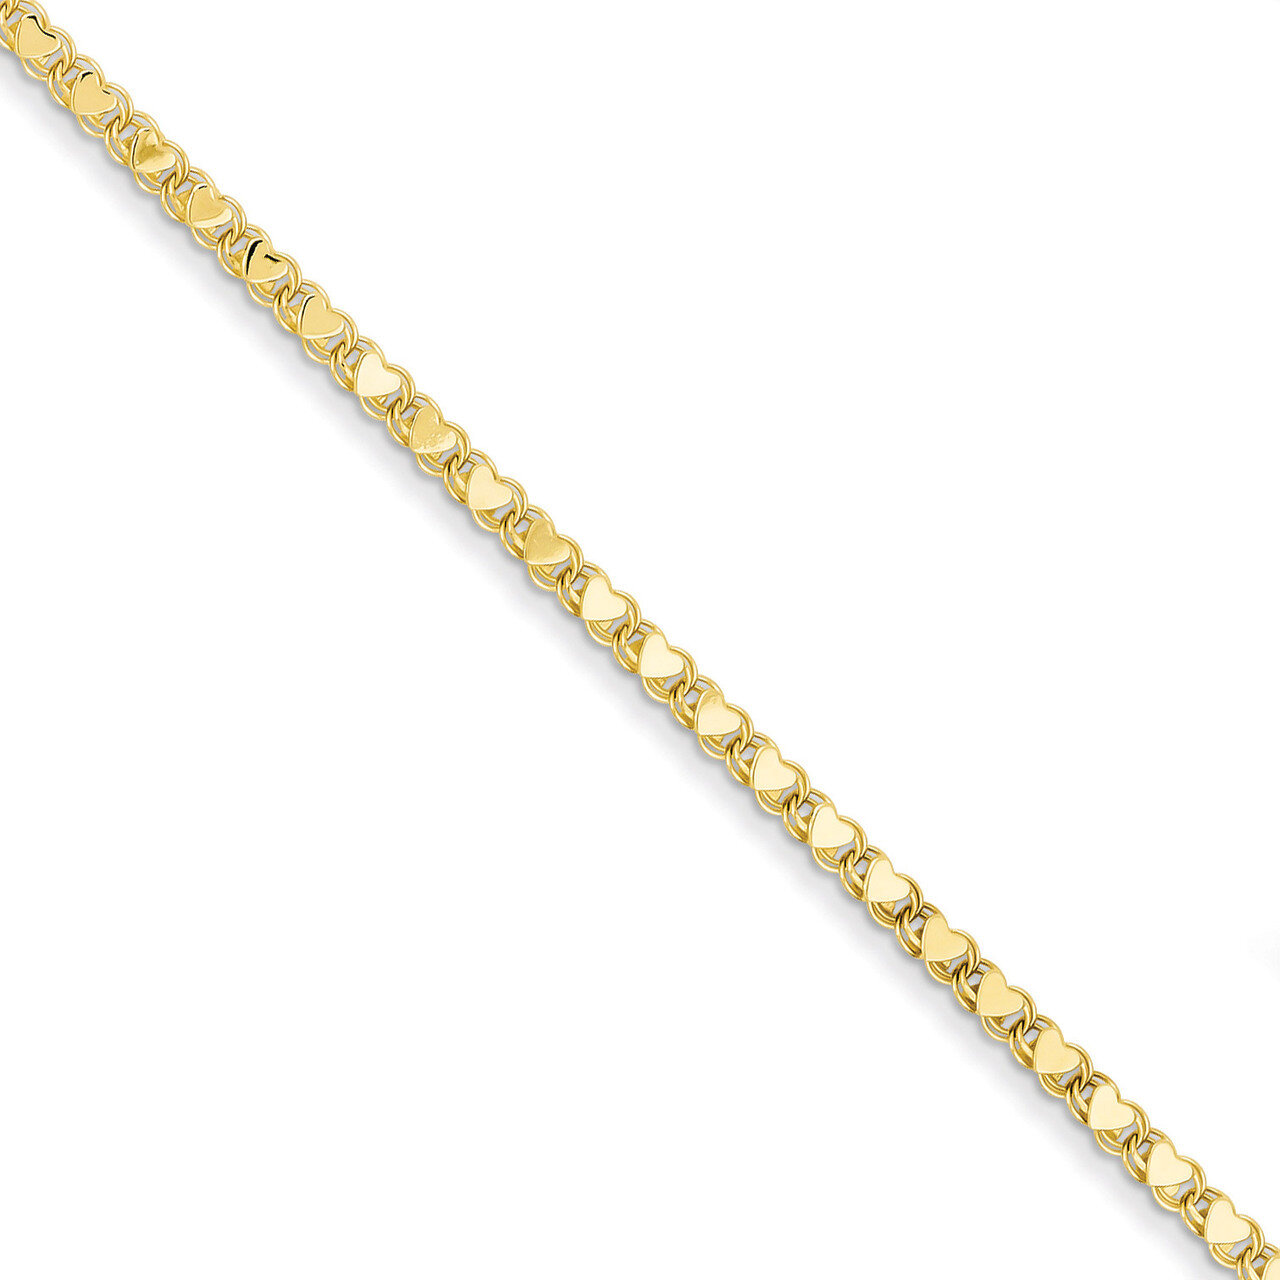 Double-Sided Heart Anklet 10 Inch 14k Gold Polished ANK70-10